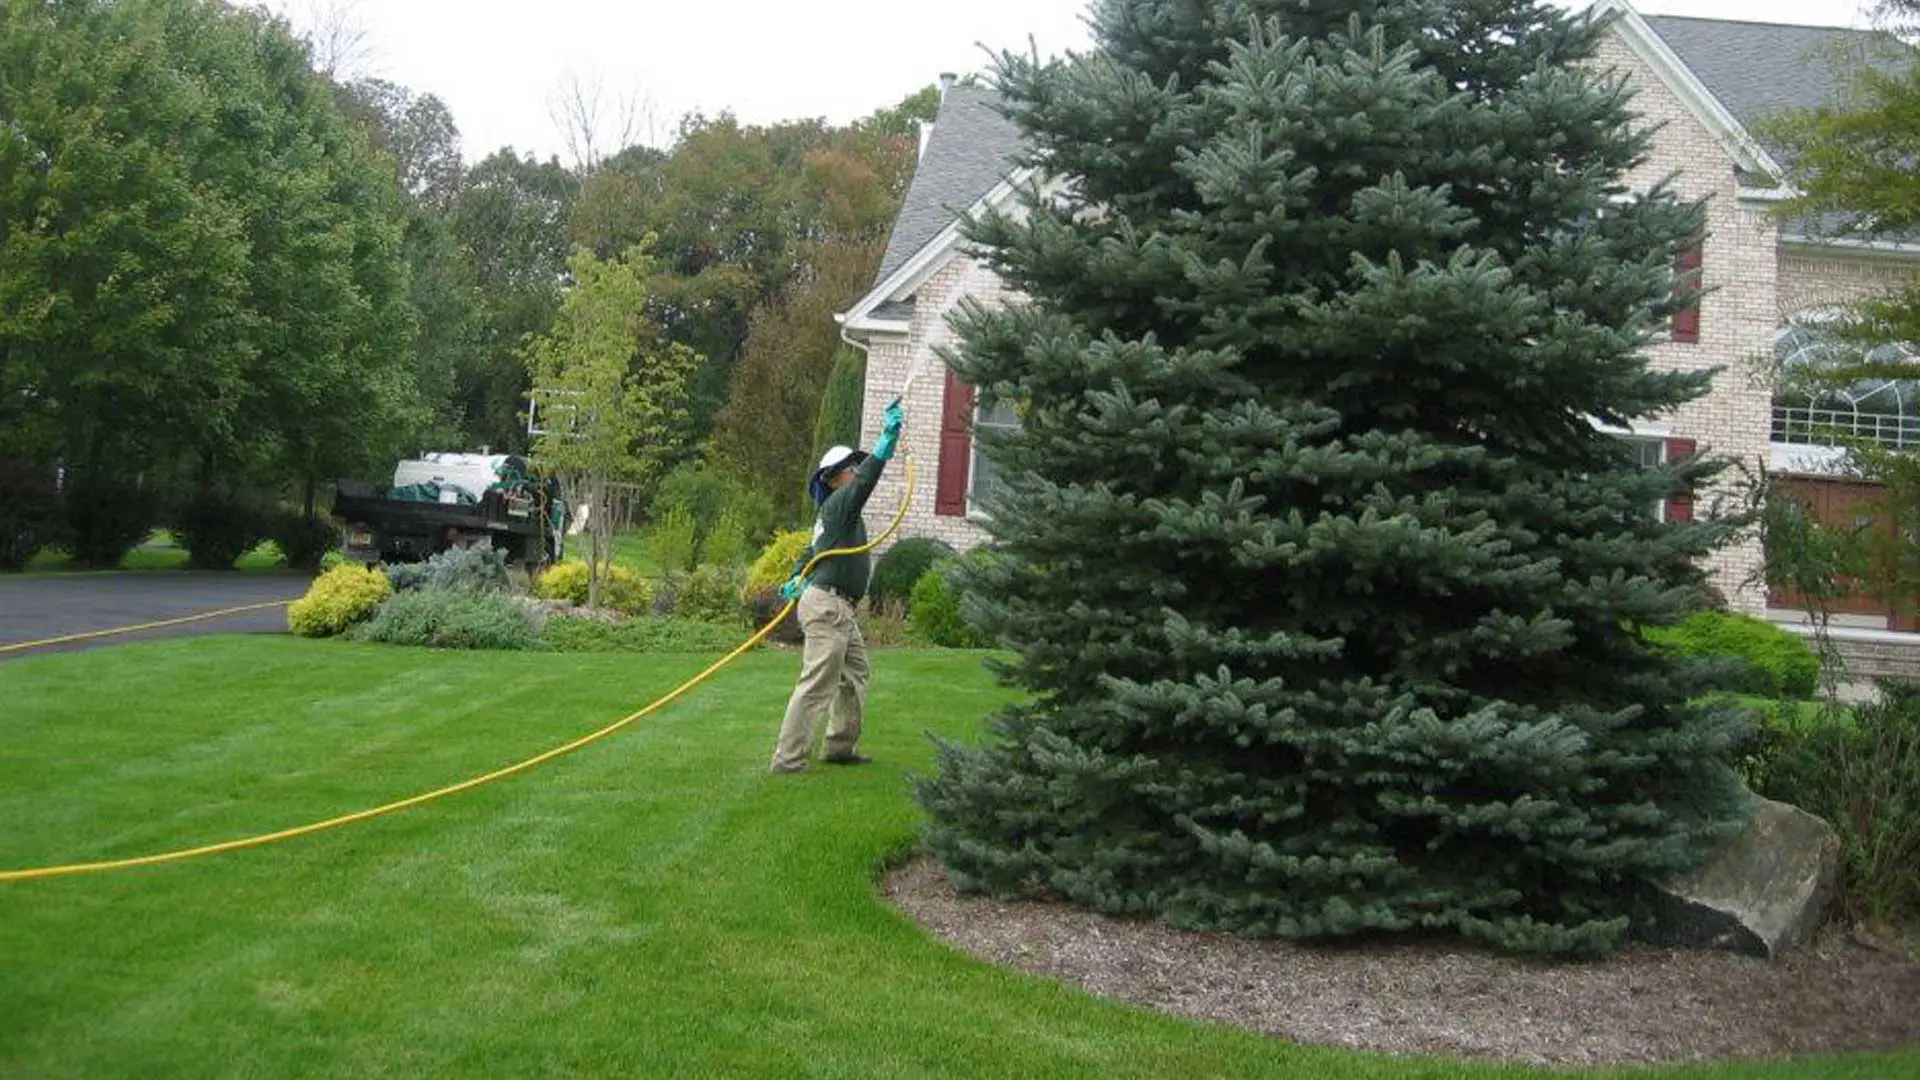 The Lawn Techs employee treating the lawn and trees in Berkeley Heights, NJ.